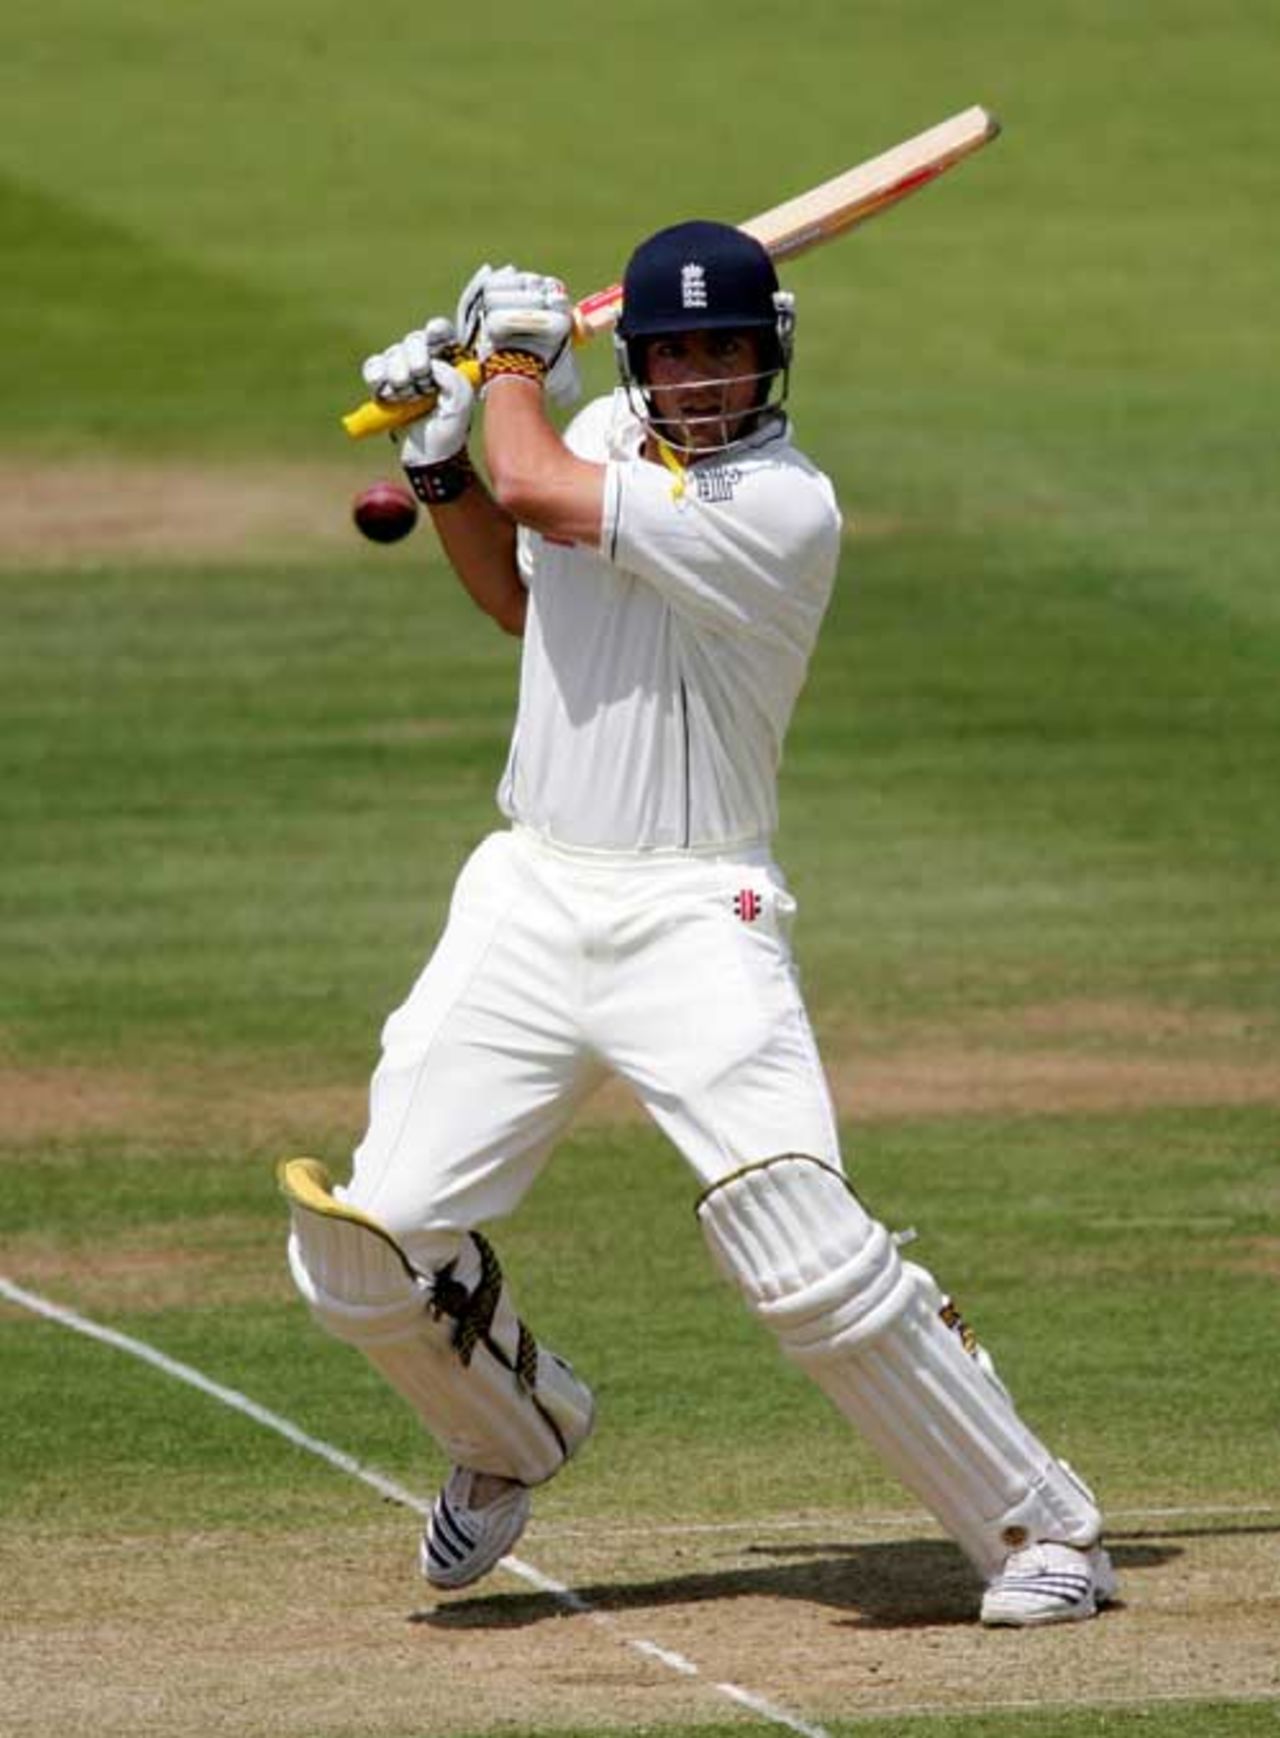 Alastair Cook of England cuts a ball from Dwayne Bravo to the boundary during the fourth day of the first npower test match between England and the West Indies at Lord's cricket ground on May 20, 2007 in London, England